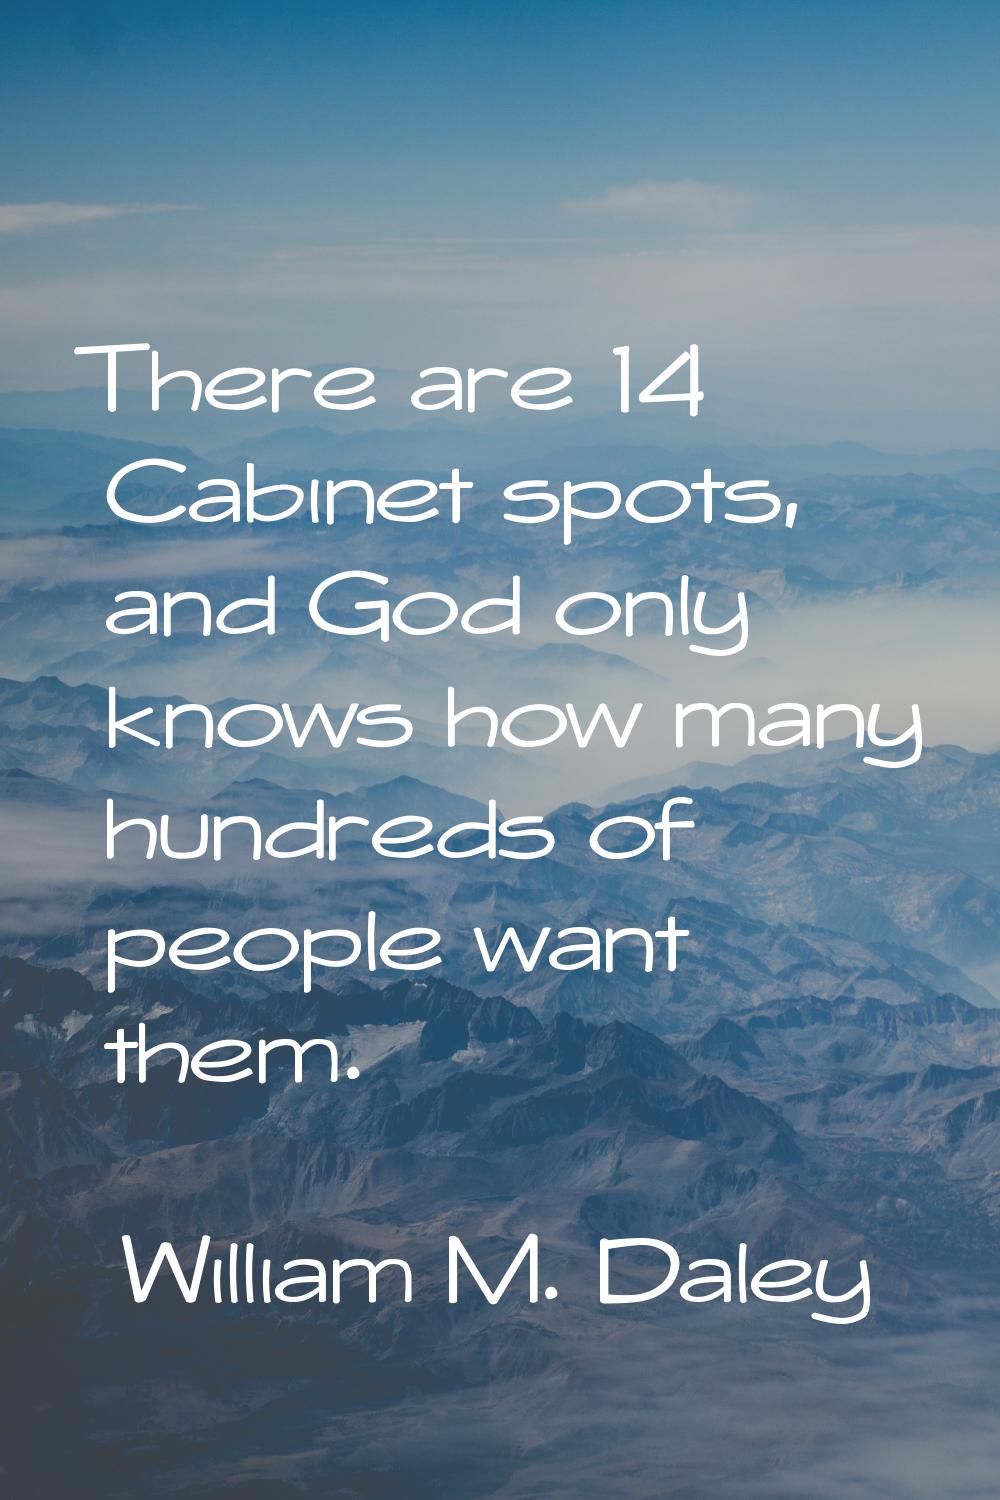 There are 14 Cabinet spots, and God only knows how many hundreds of people want them.